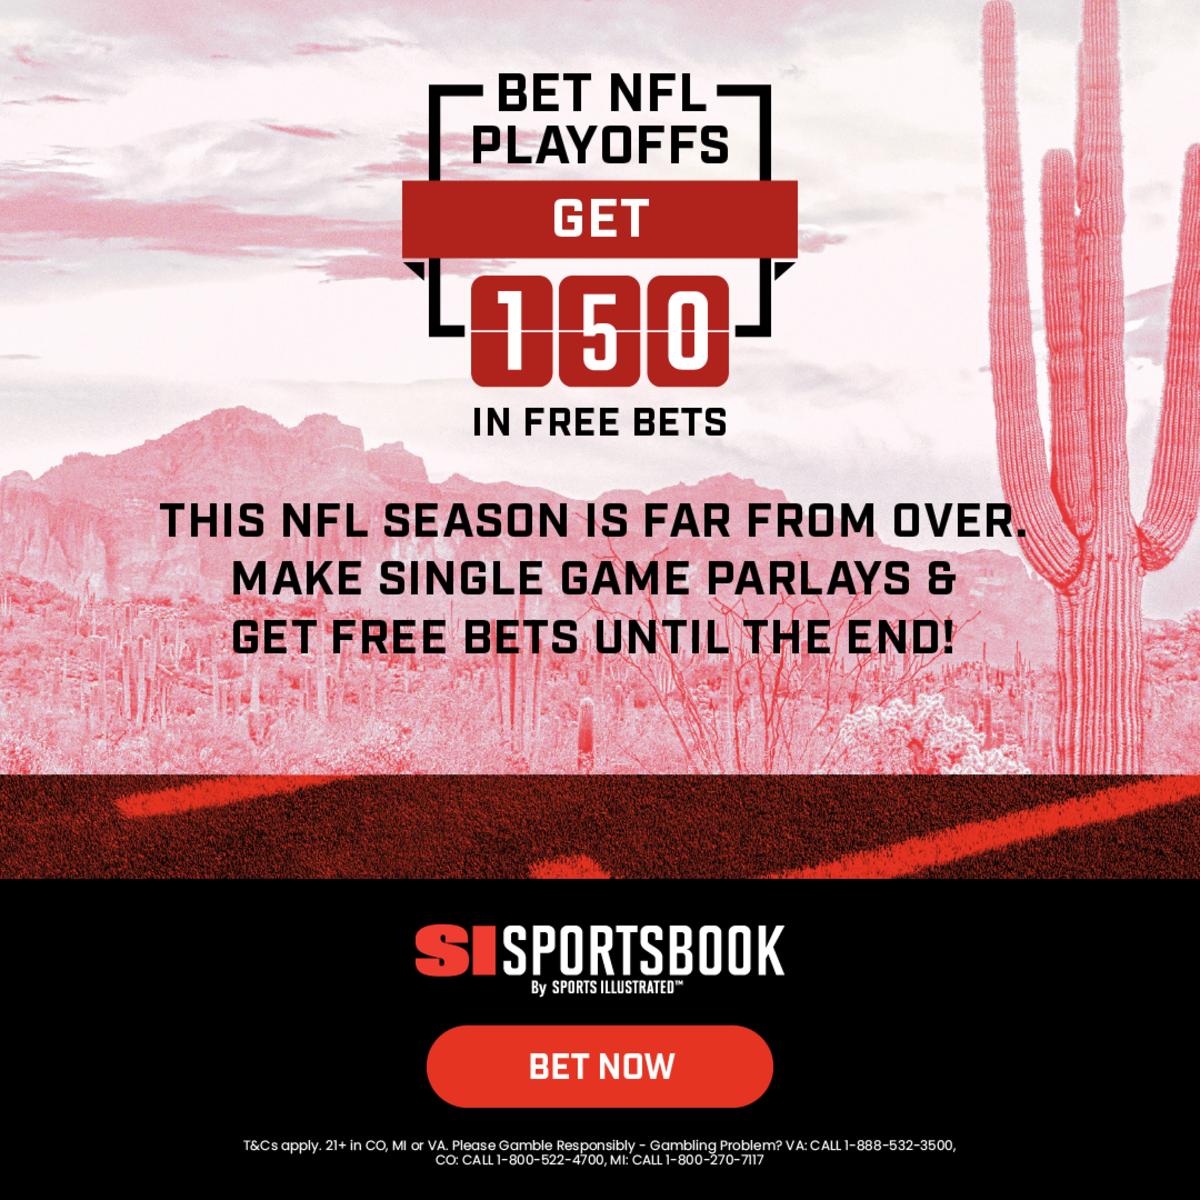 Get $150 in free bets from SI Sportsbook